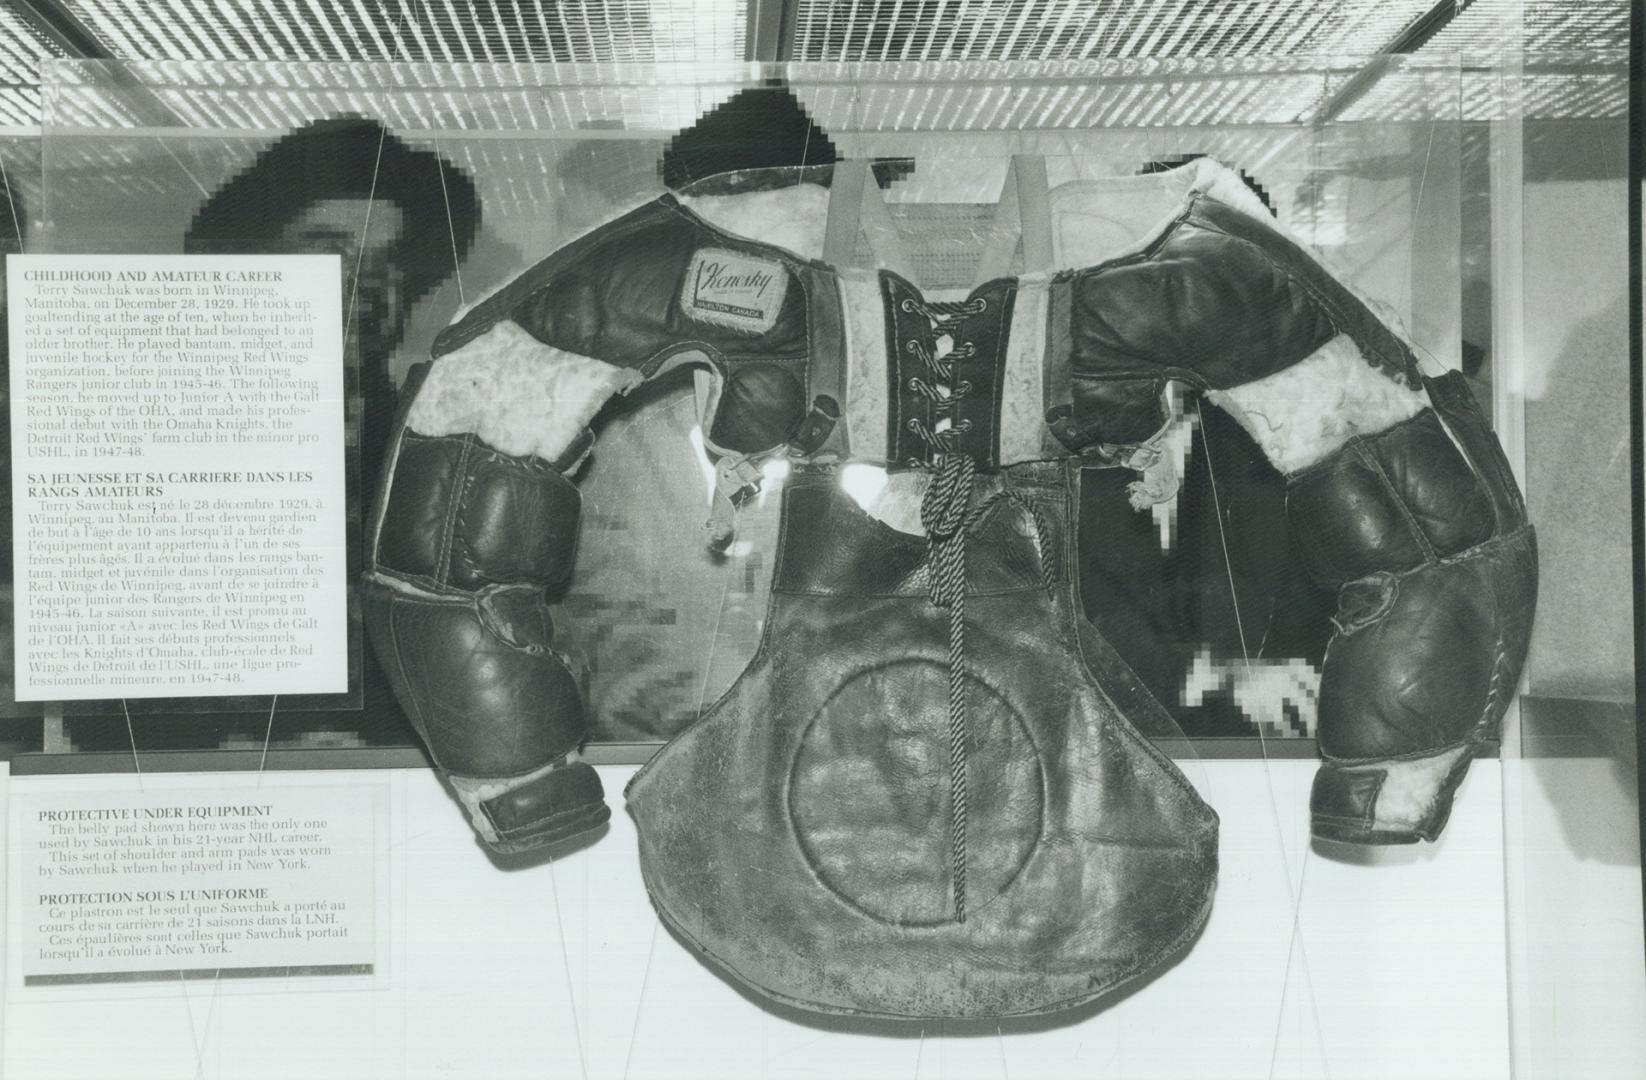 Terry Sawchuk's chest protector